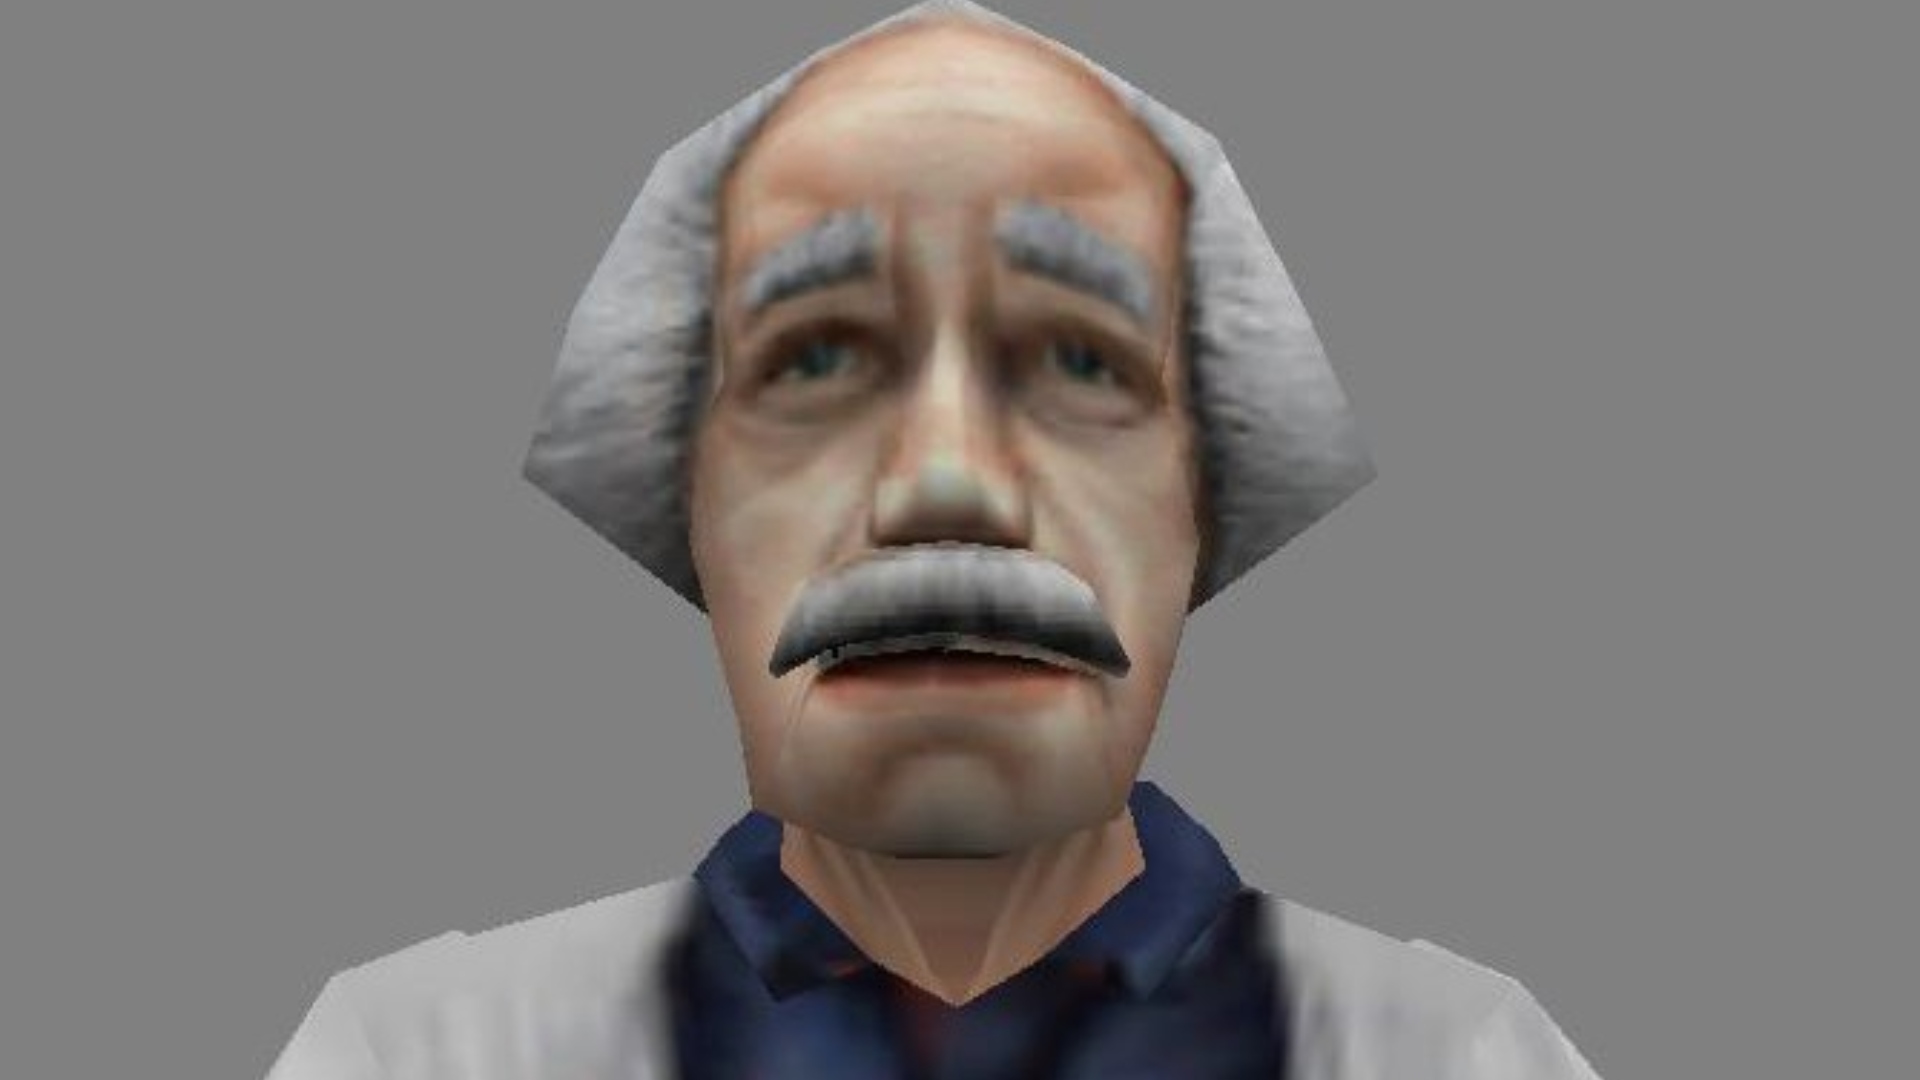 Half-Life characters: A scientist from Valve FPS game Half-Life who looks like Einstein